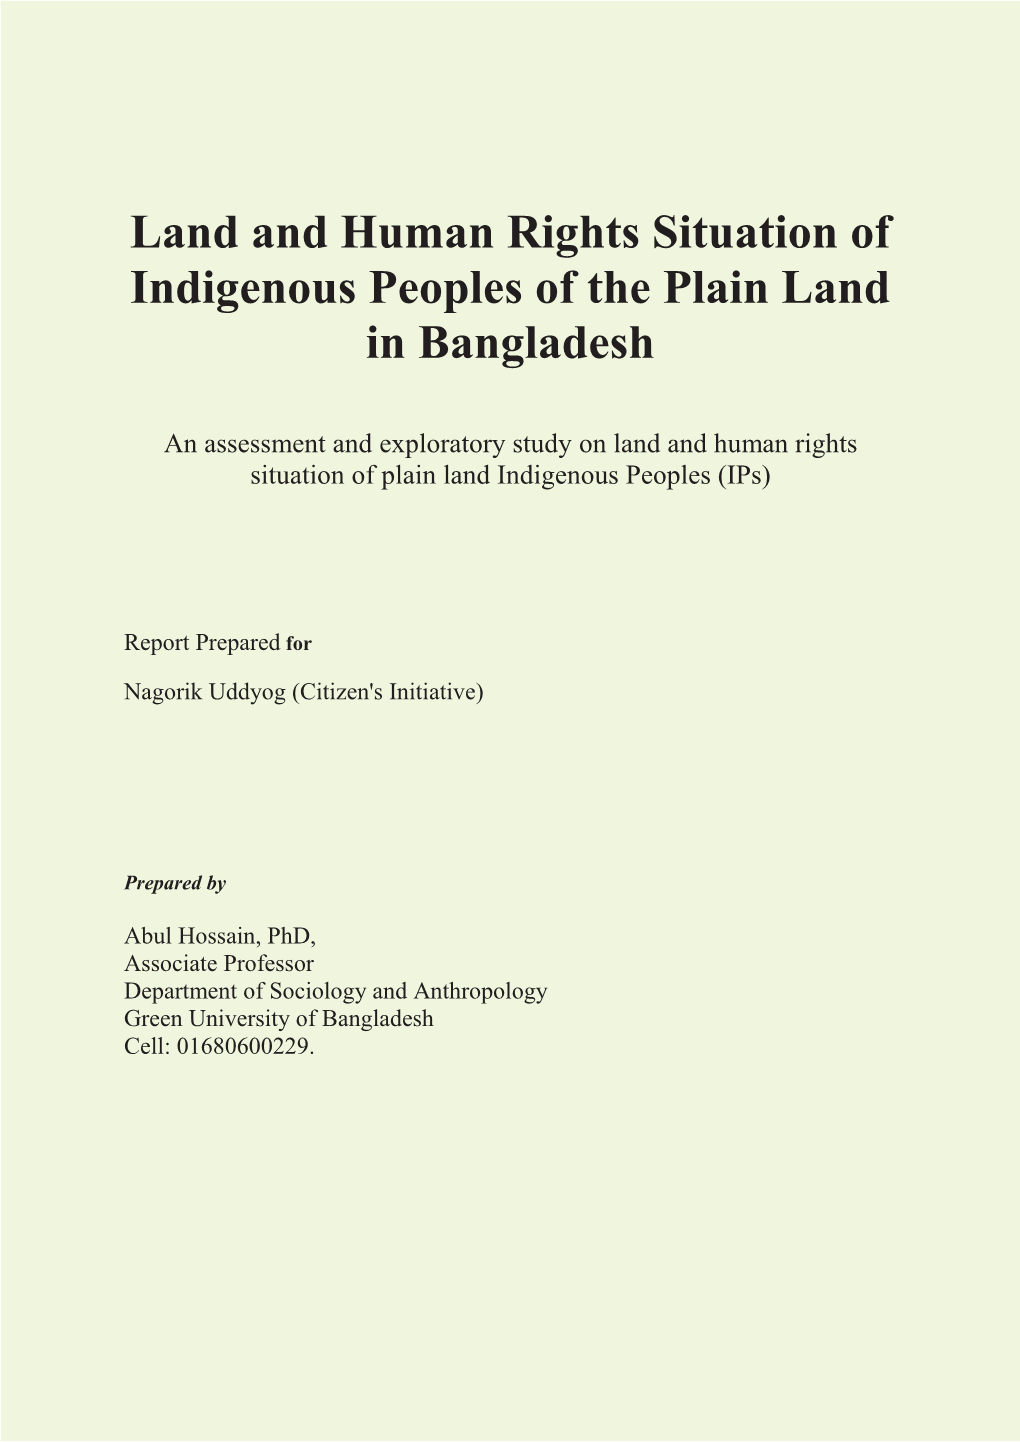 Land and Human Rights Situation of Indigenous Peoples of the Plain Land in Bangladesh